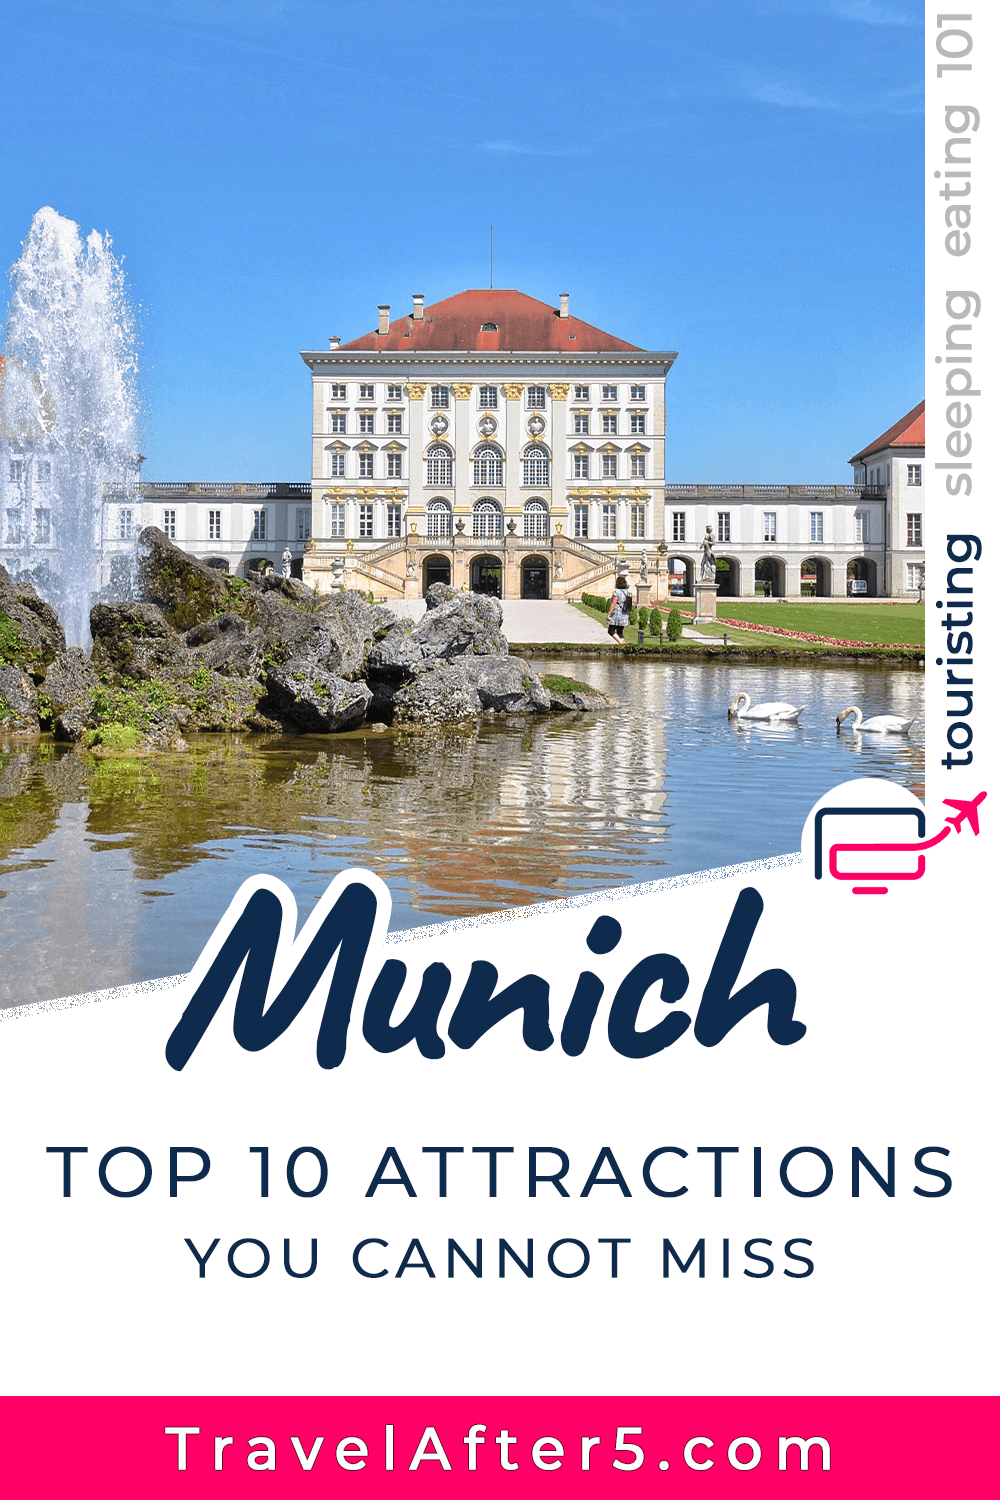 Pinterest Pin to Munich Top 10 Attractions You Cannot Miss, by Travel After 5